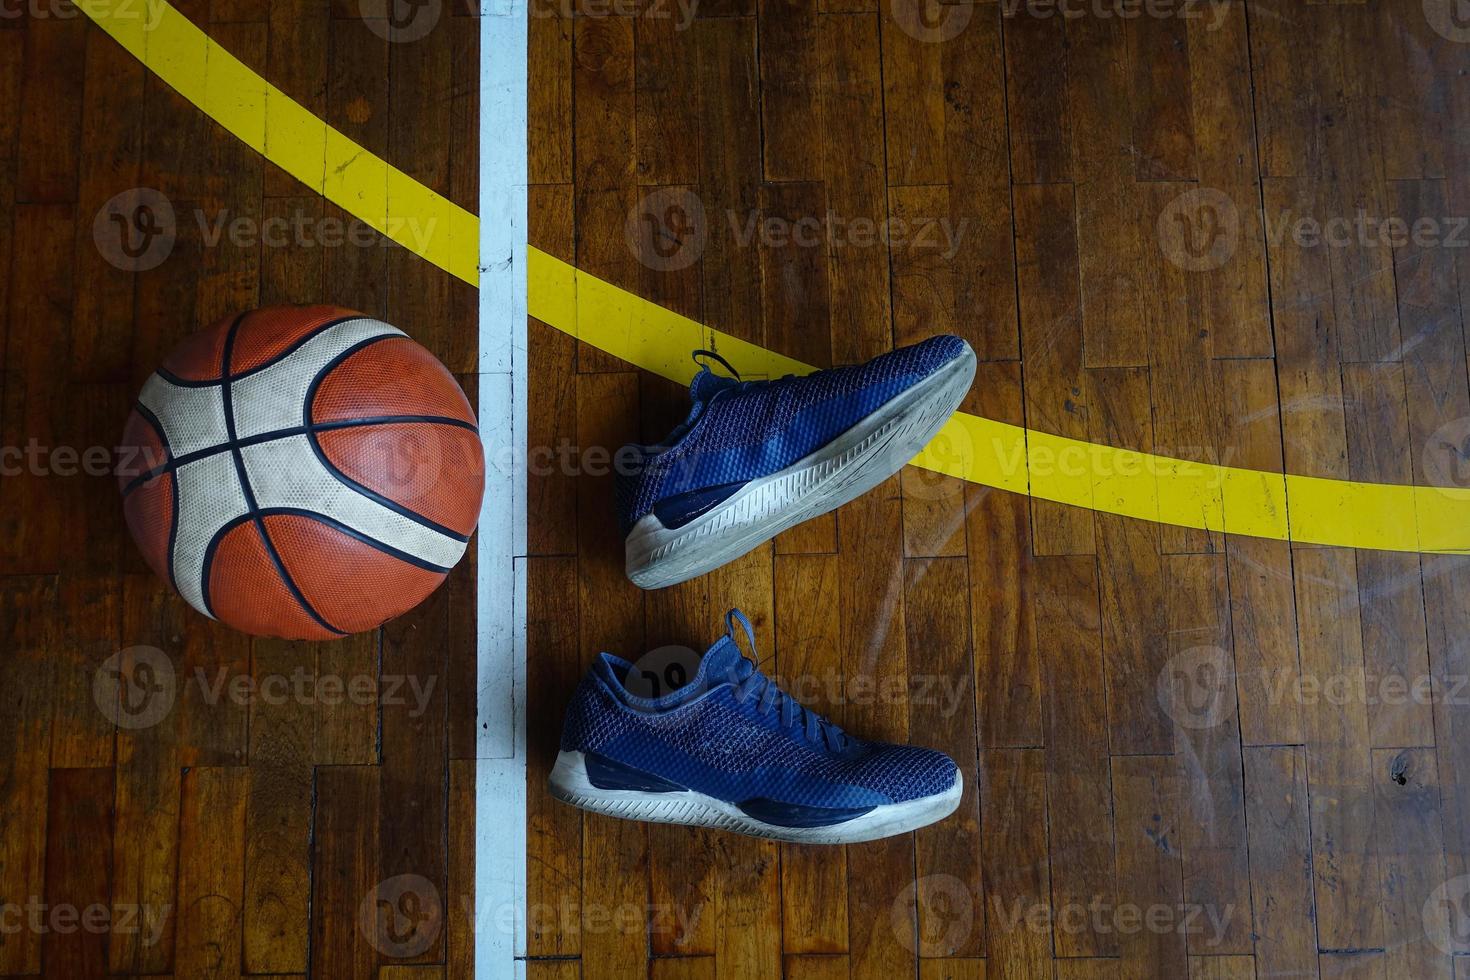 Top view of shoes and basket ball on wooden basketball court photo